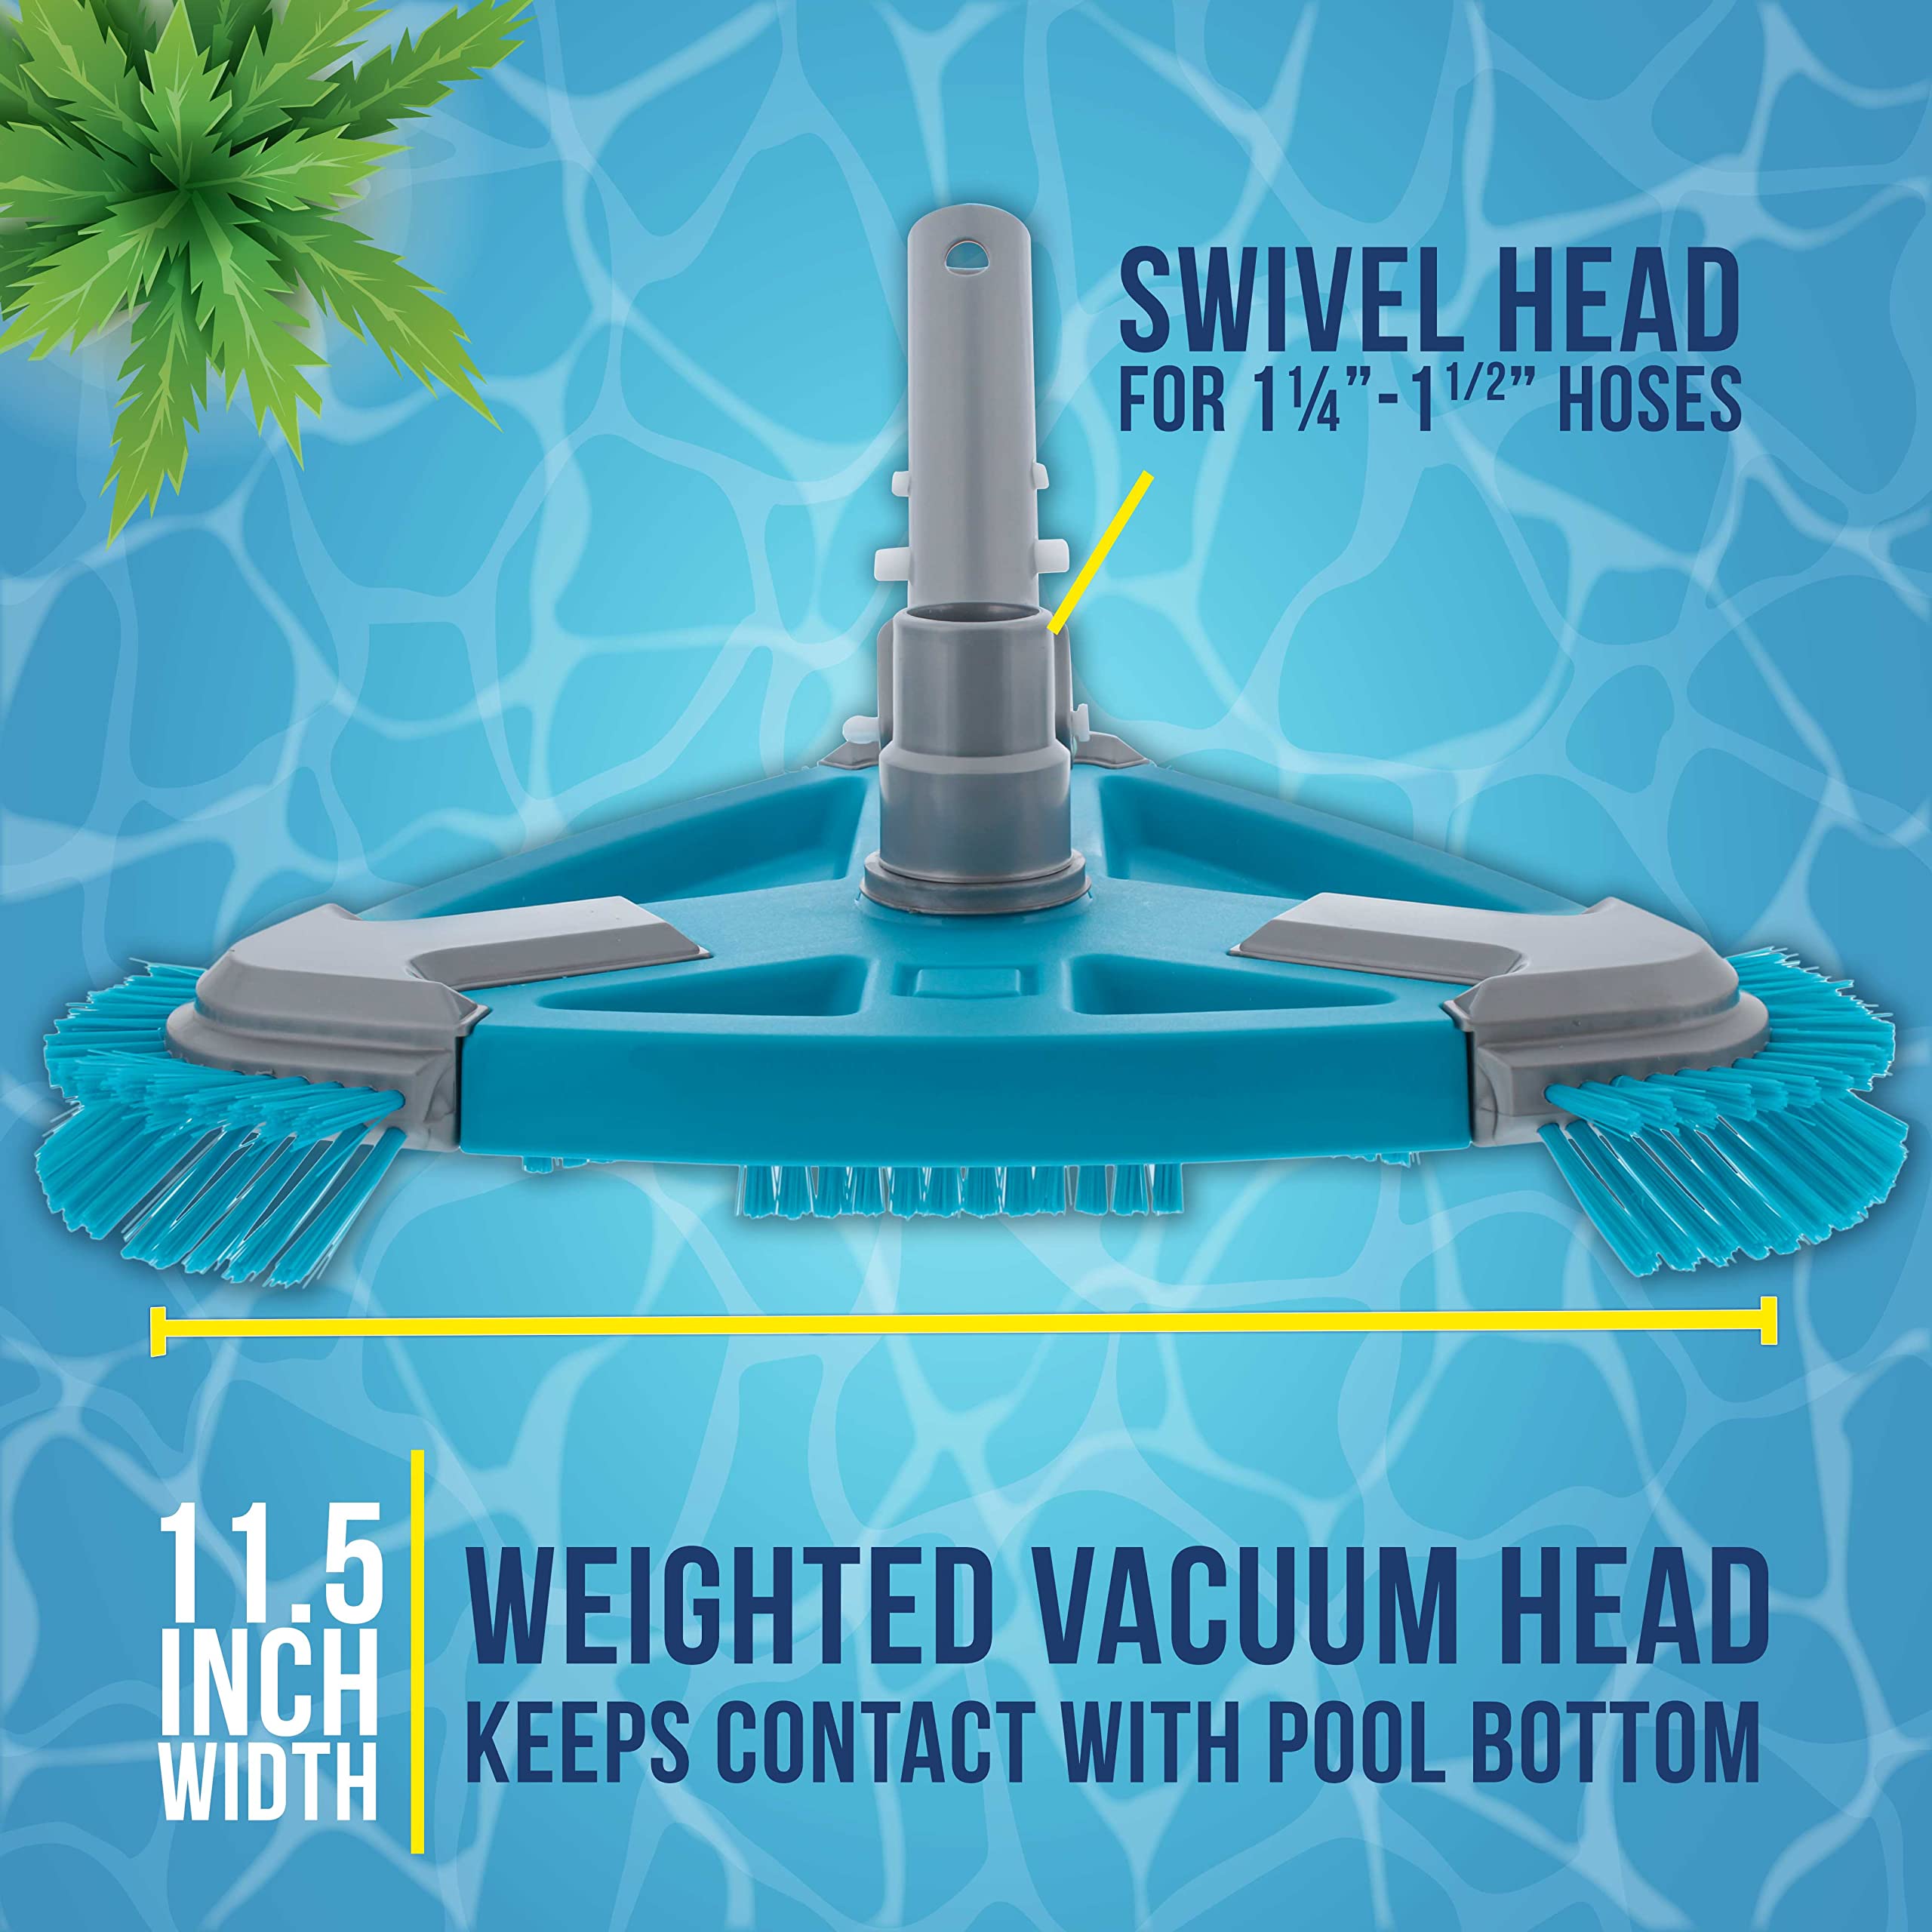 U.S. Pool Supply Deluxe Weighted Triangular Pool Vacuum Head with Side Brushes, Swivel Connection, EZ Clip Handle - For Above Ground & Inground Swimming Pools – Vinyl Liner Floor, Step, Corner Cleaner